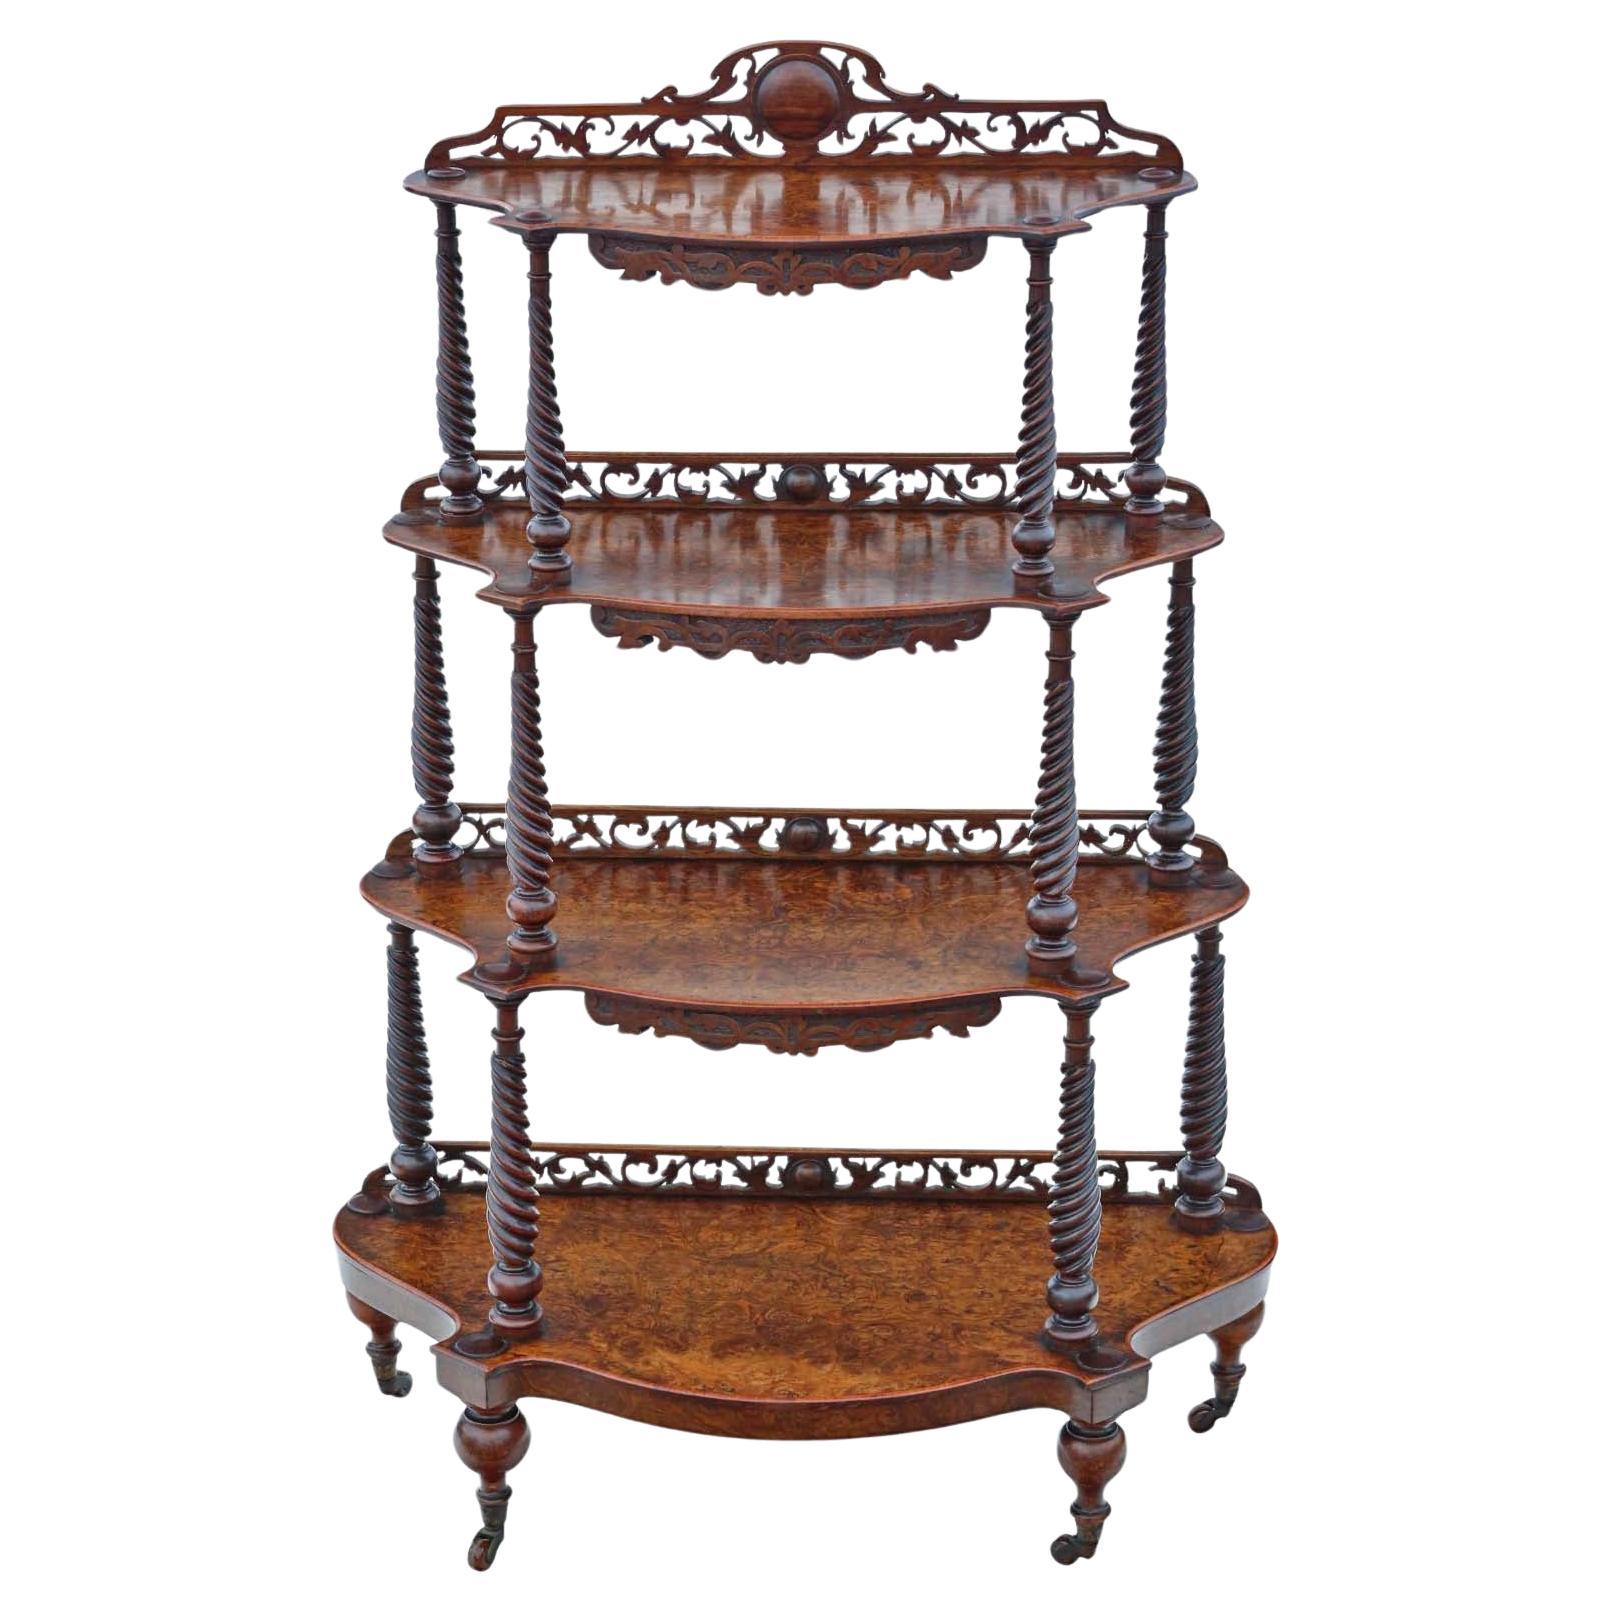 19th Century Burr Walnut Demi-Lune Console Table Quality Antique display serving